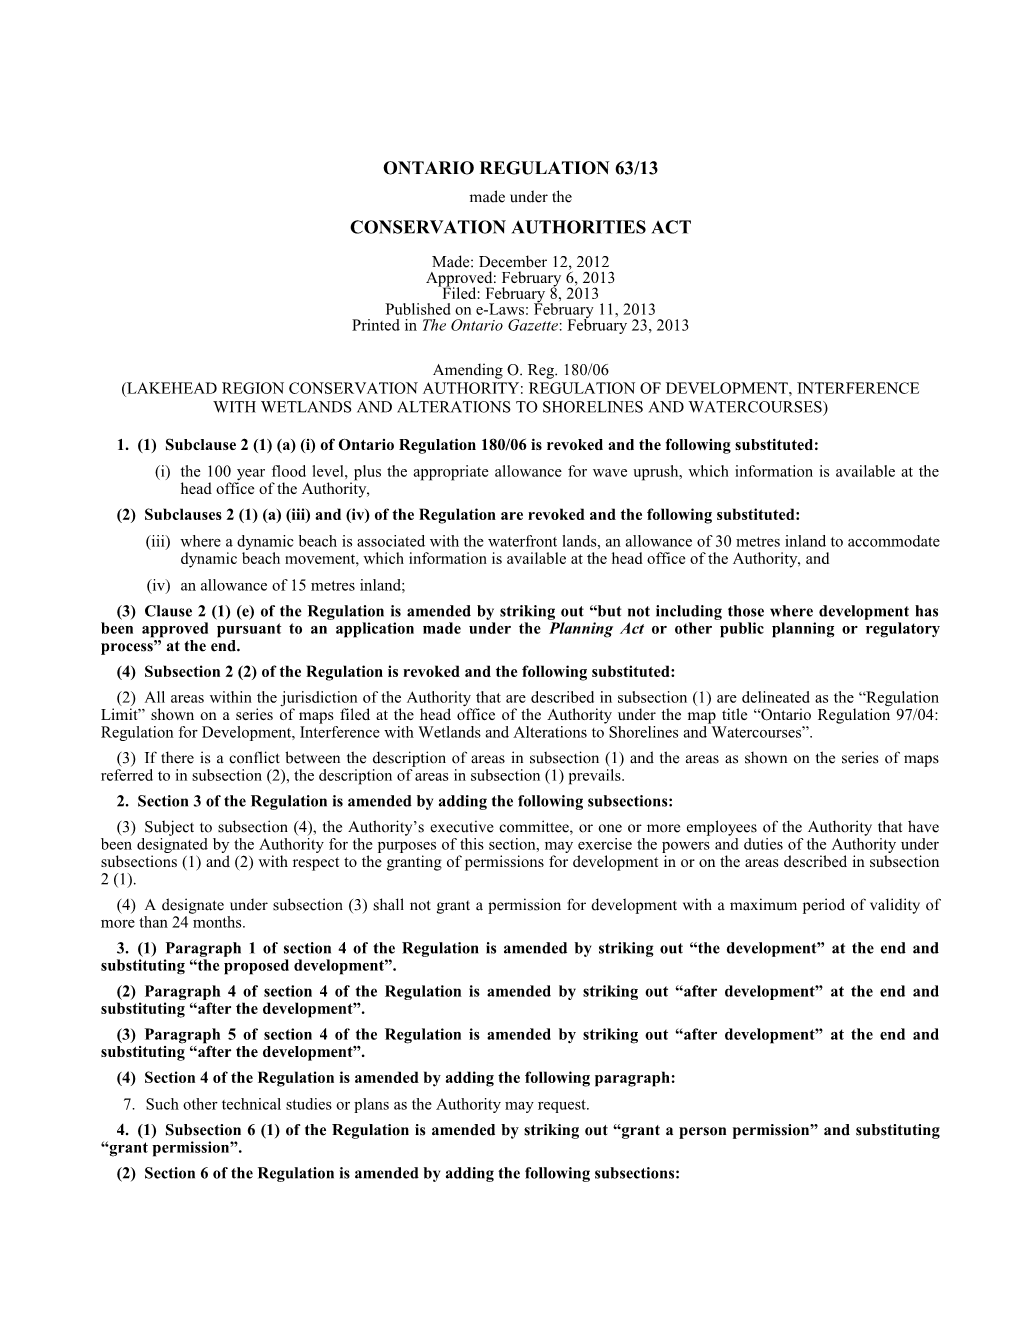 CONSERVATION AUTHORITIES ACT - O. Reg. 63/13